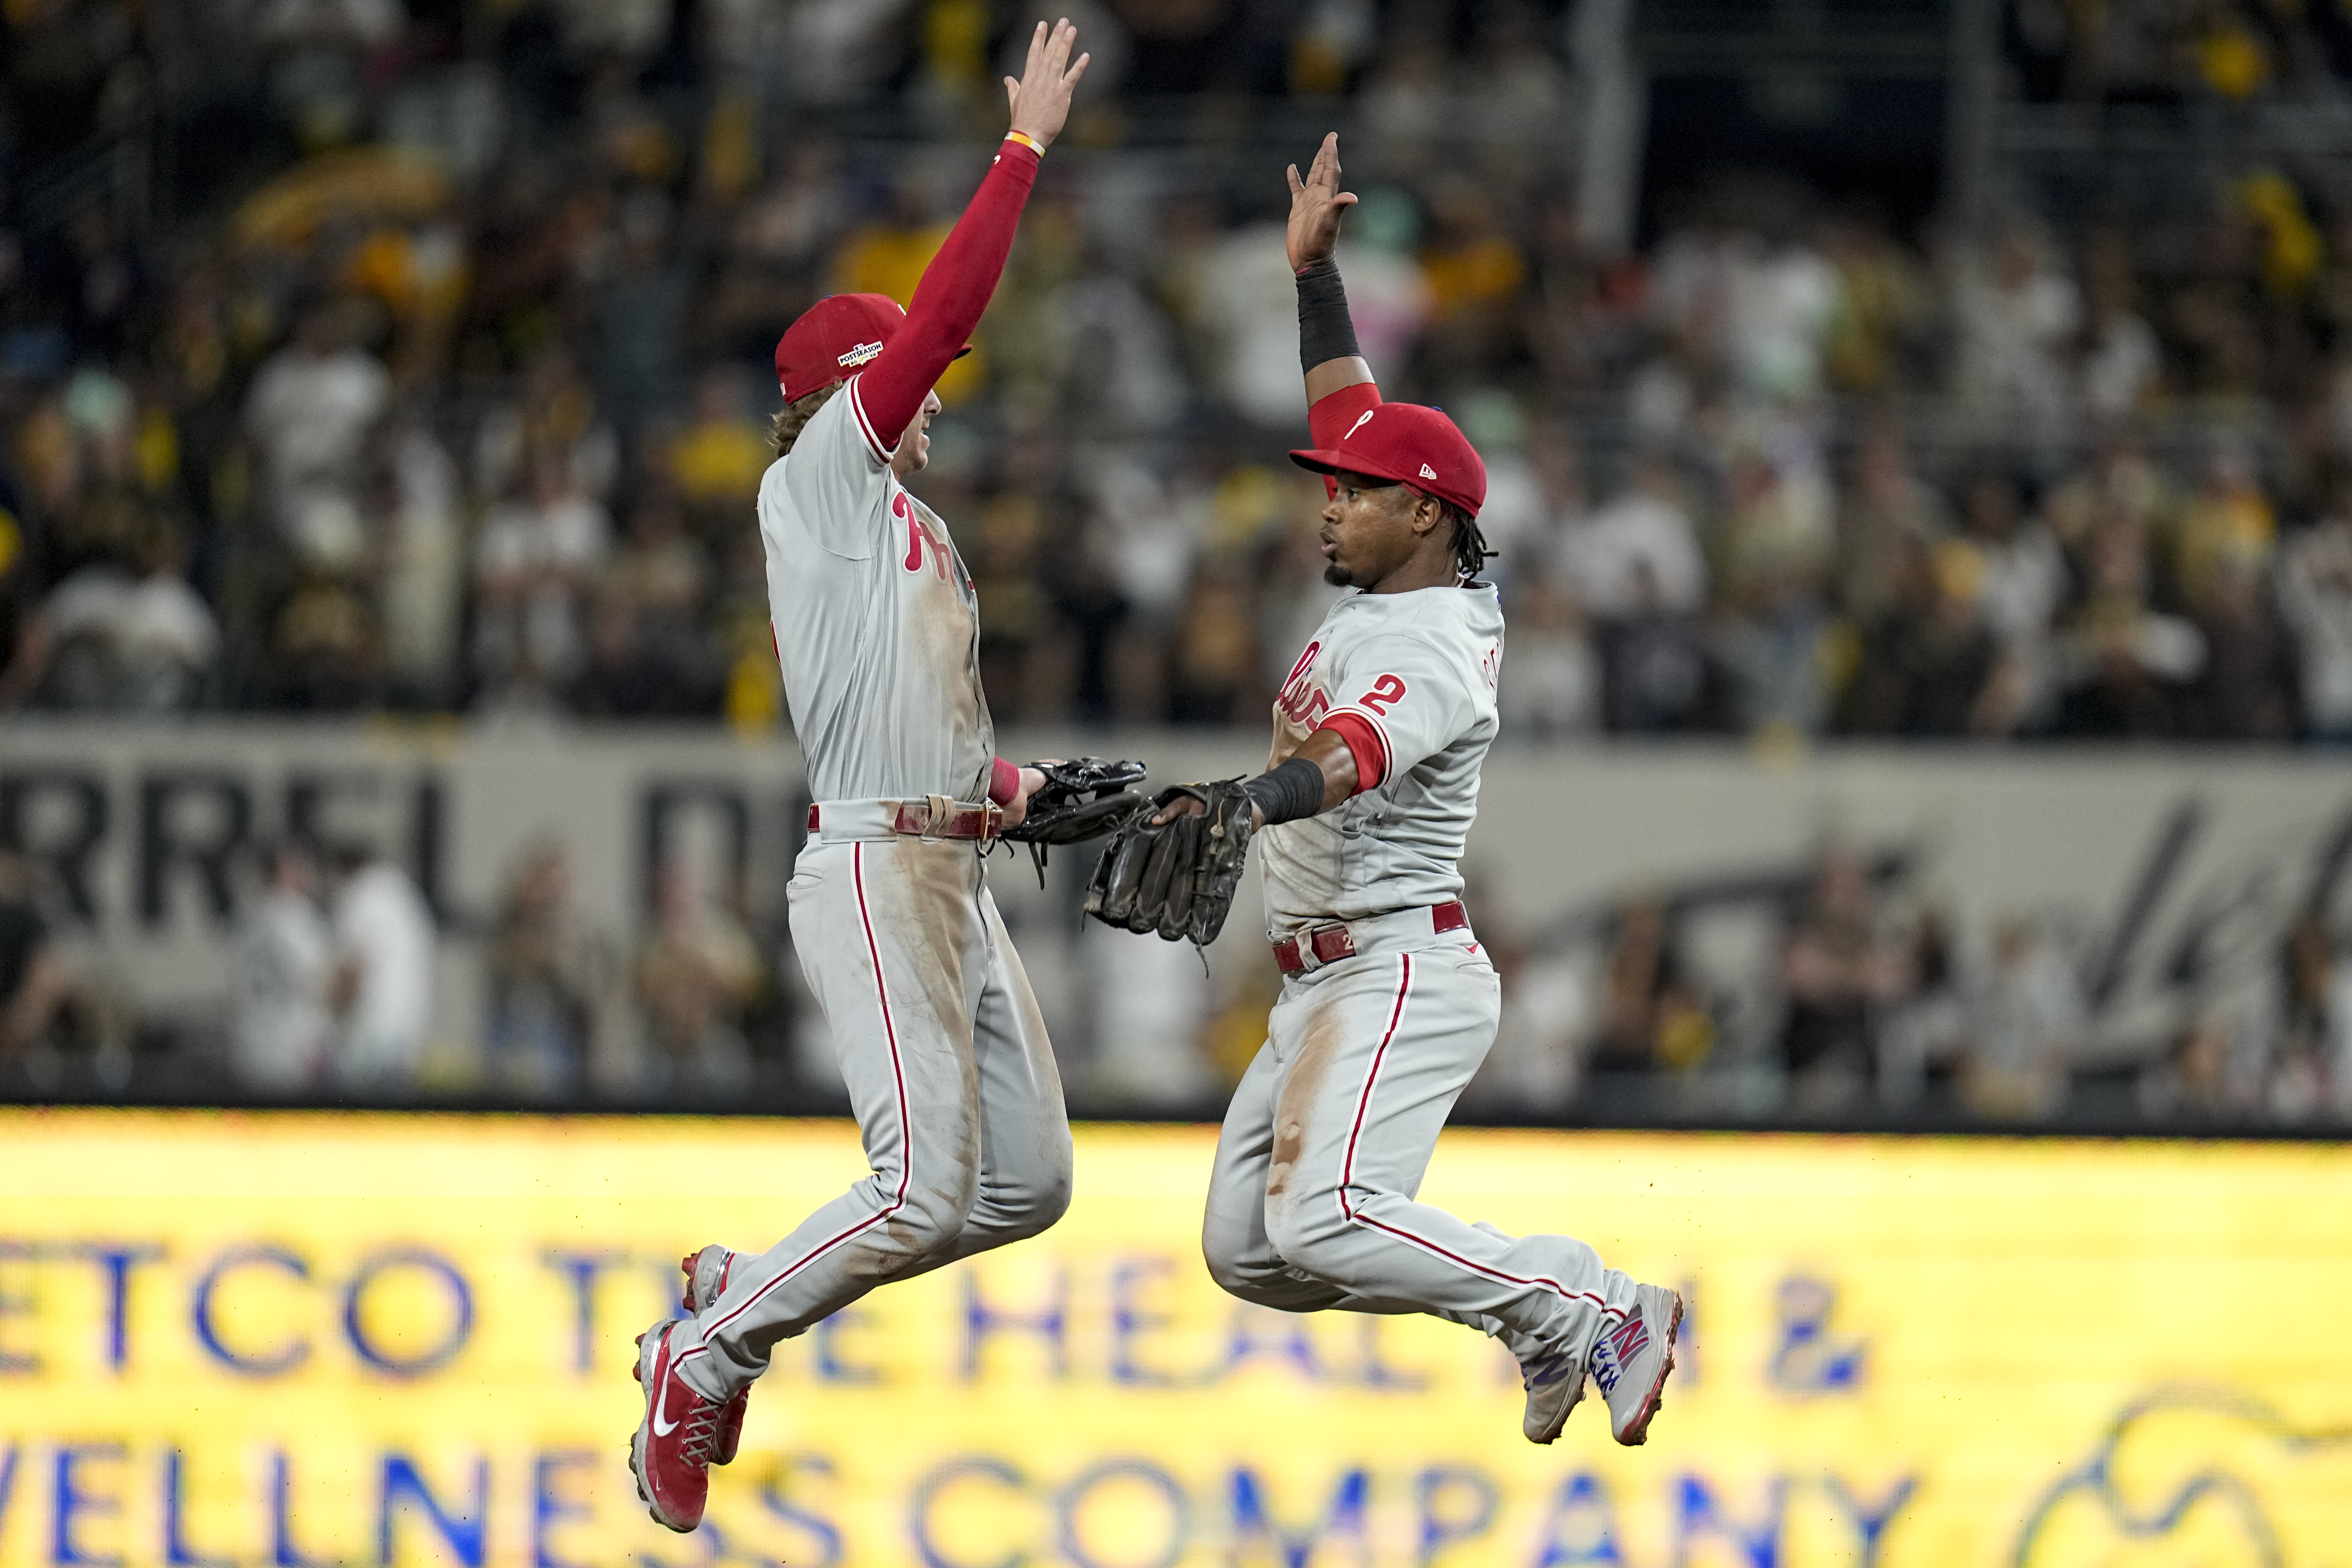 Phillies vs. Padres NLCS Game 2 prediction, betting odds for MLB on  Wednesday 